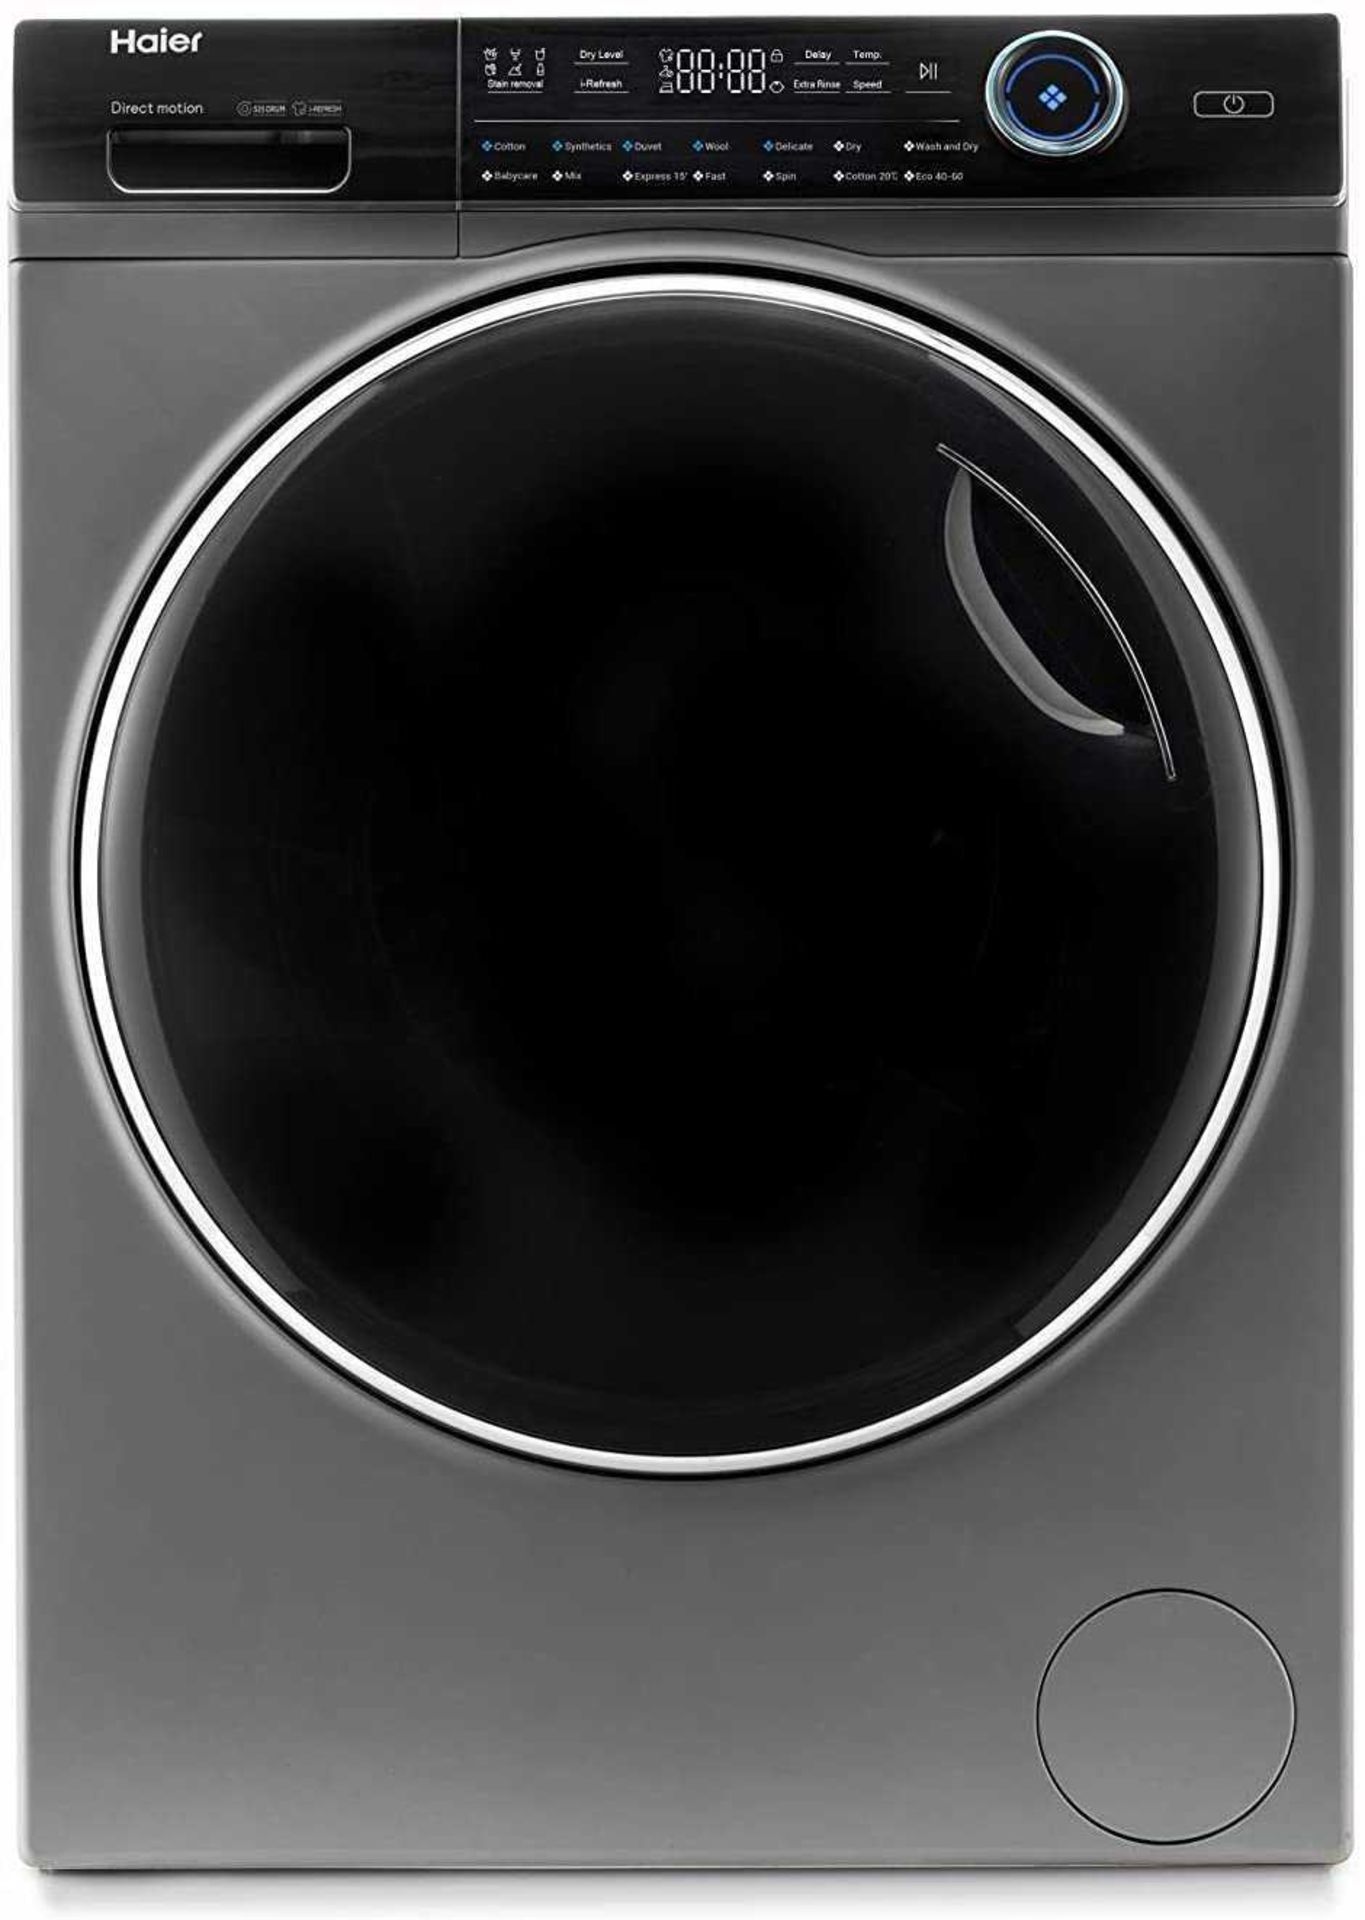 (Sp) RRP £500 Lot To Contain 1 Haier Hwd80-B14979S 8Kg / 5Kg Washer Dryer With 1400 Rpm - Graphite - Image 2 of 4